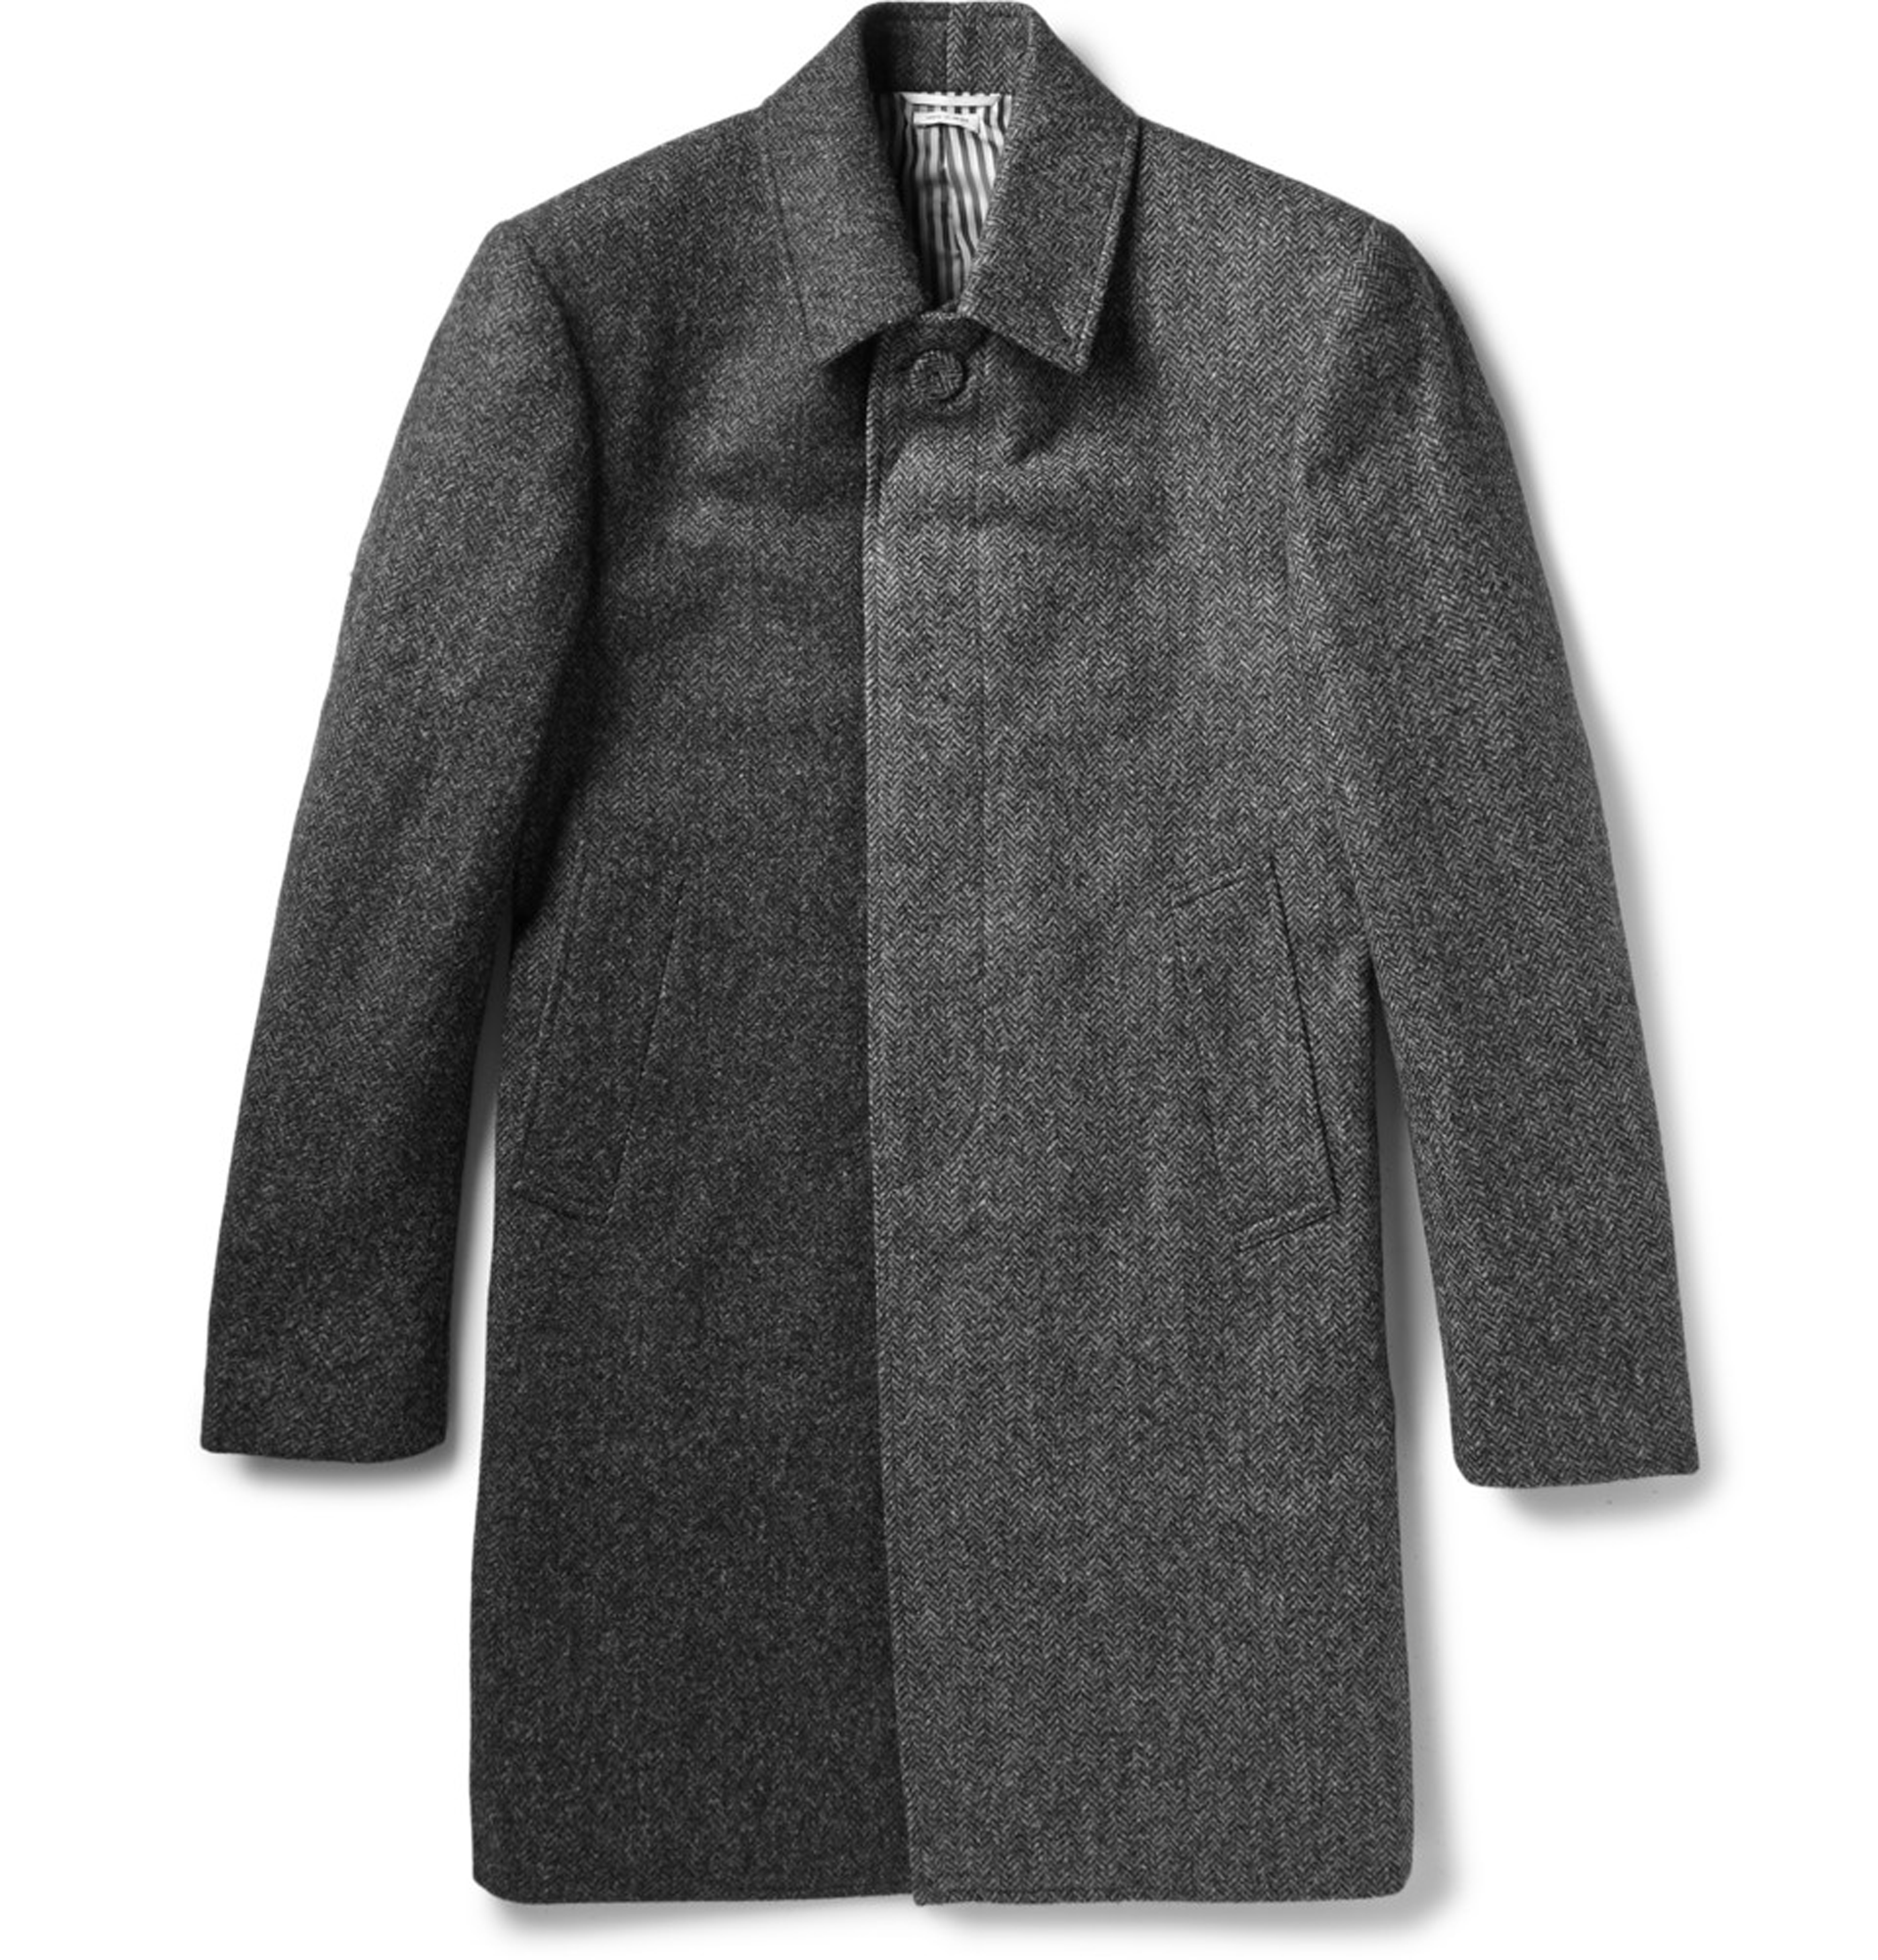 Mr Porter x Thom Browne's Exclusive Fall/Winter 2014 Capsule Collection ...